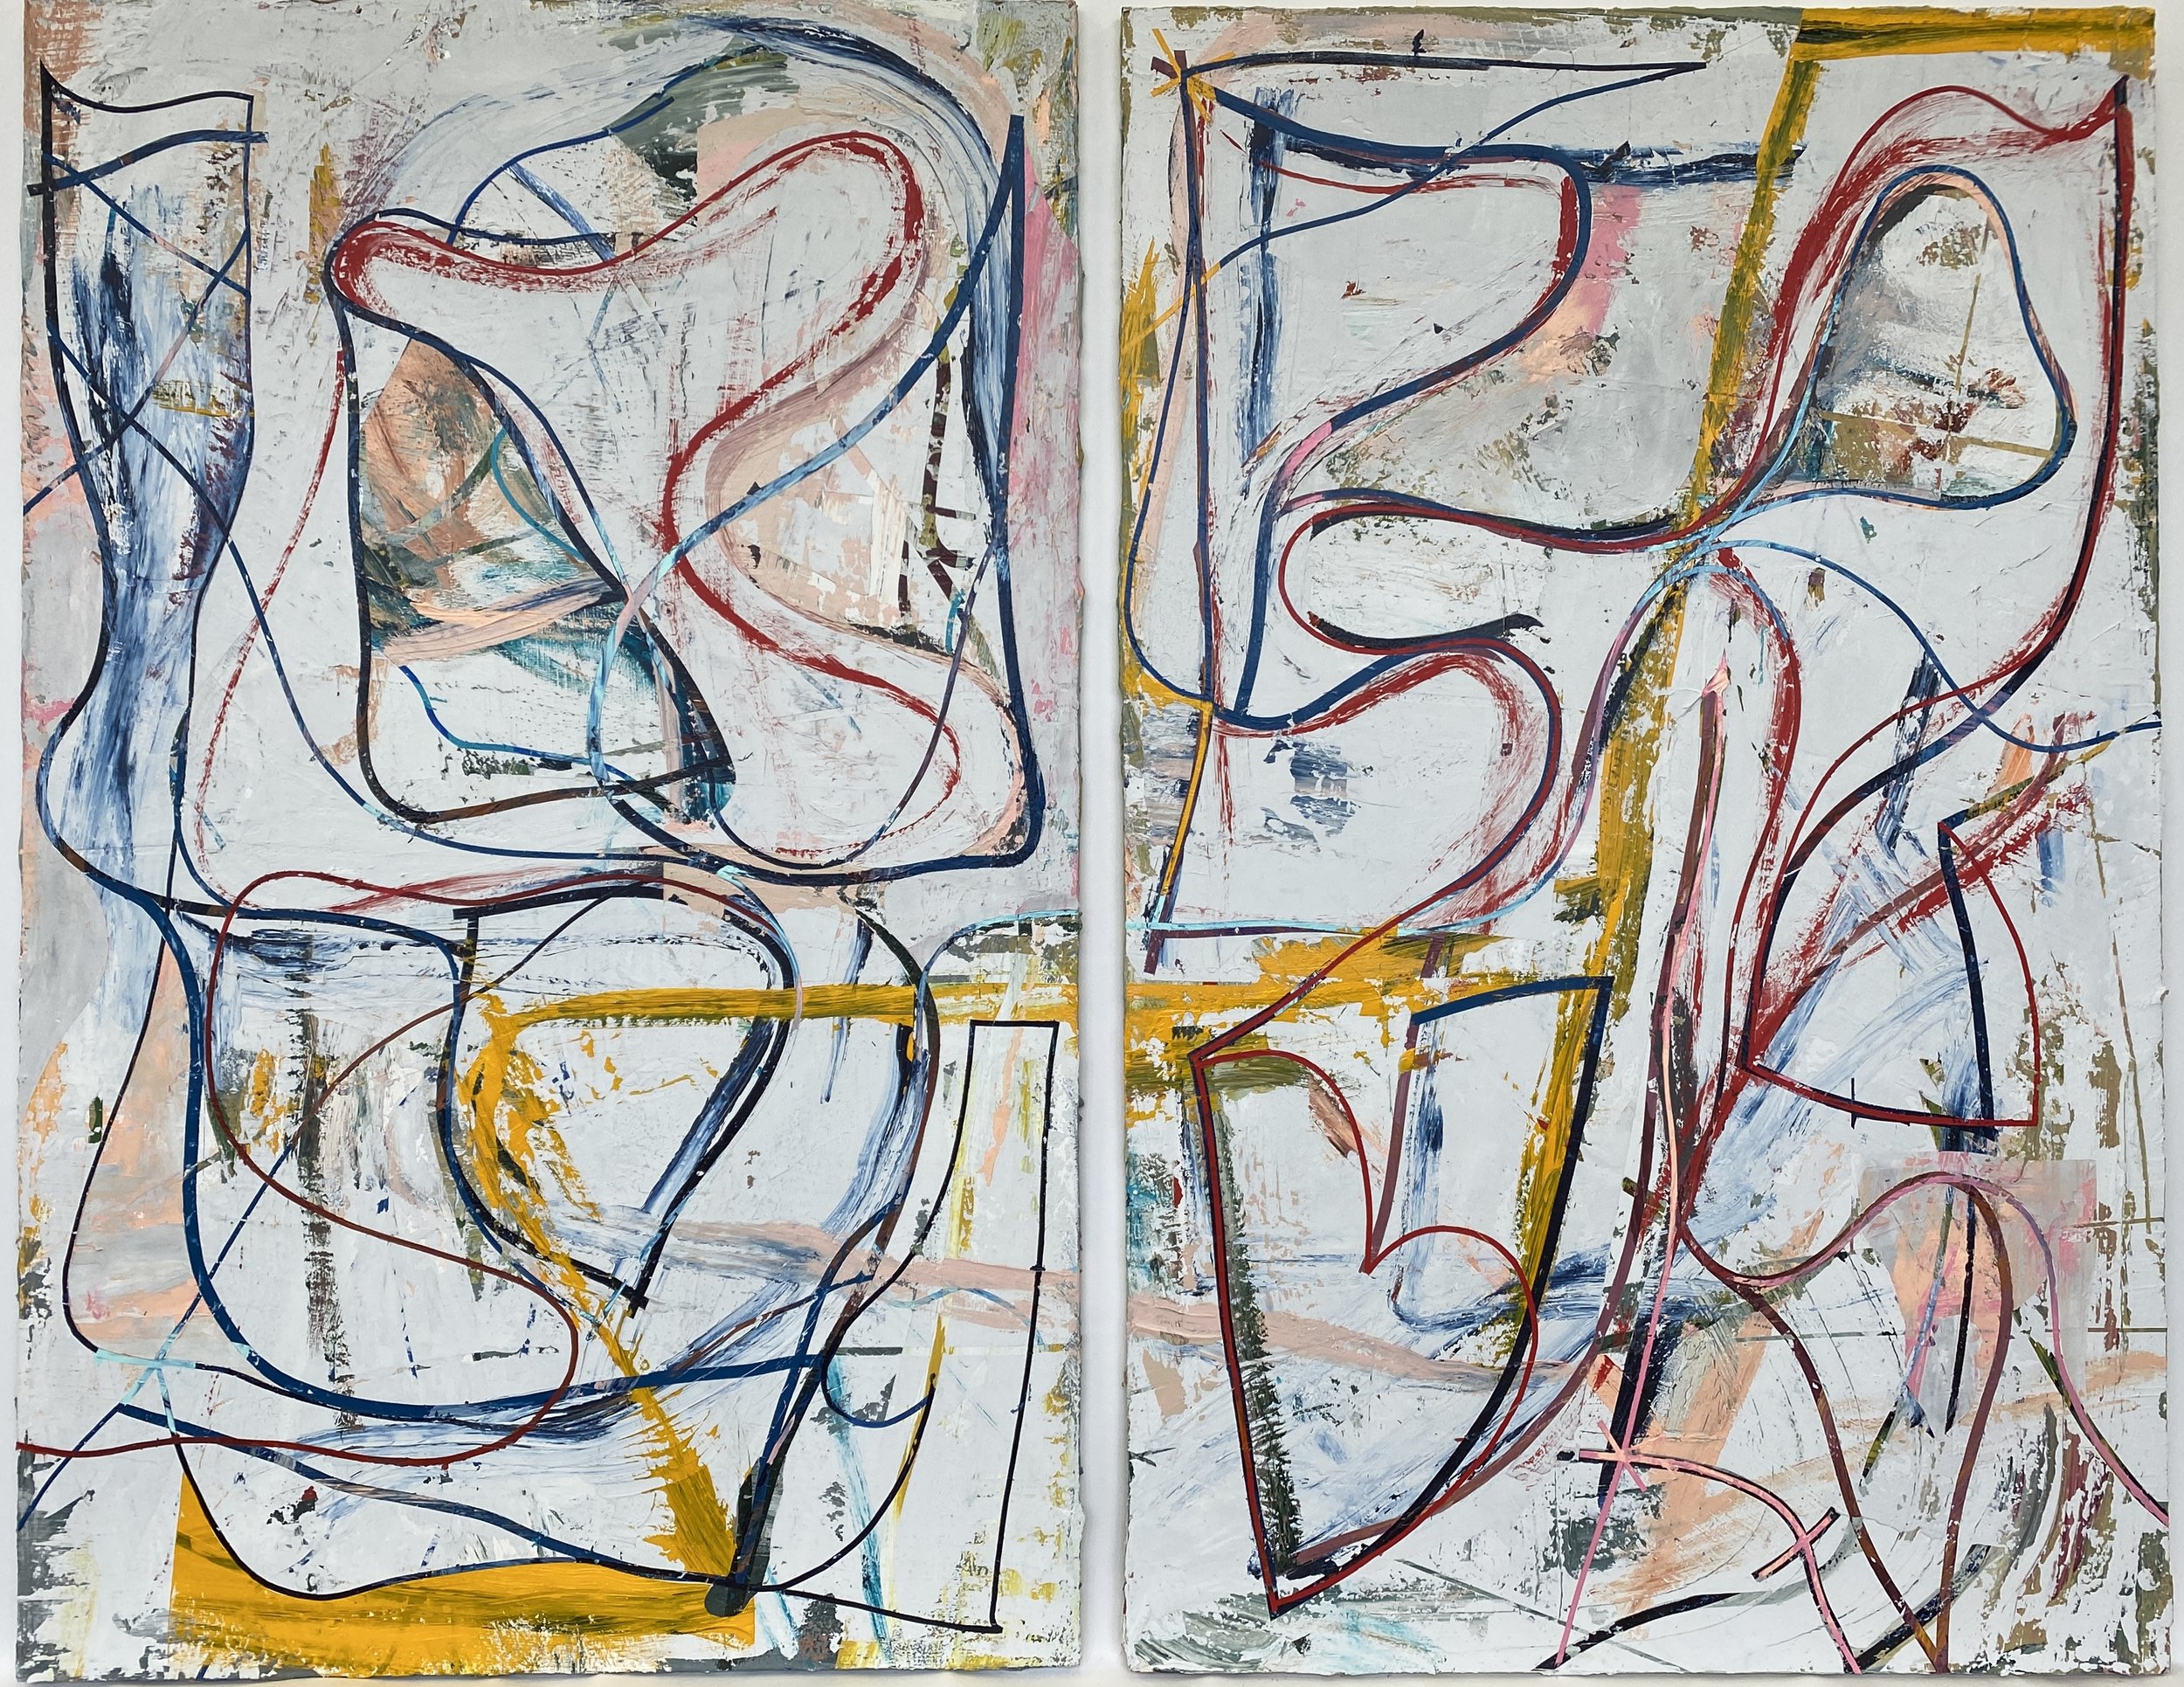   Close Cover, Strike Gently   Plaster, Acrylic, Ink, and Graphite on Aluminum Panels.(custom Framed). Diptych. Each panel is 48” x 30”. overall size when installed, 48” x 62”. 2022. 